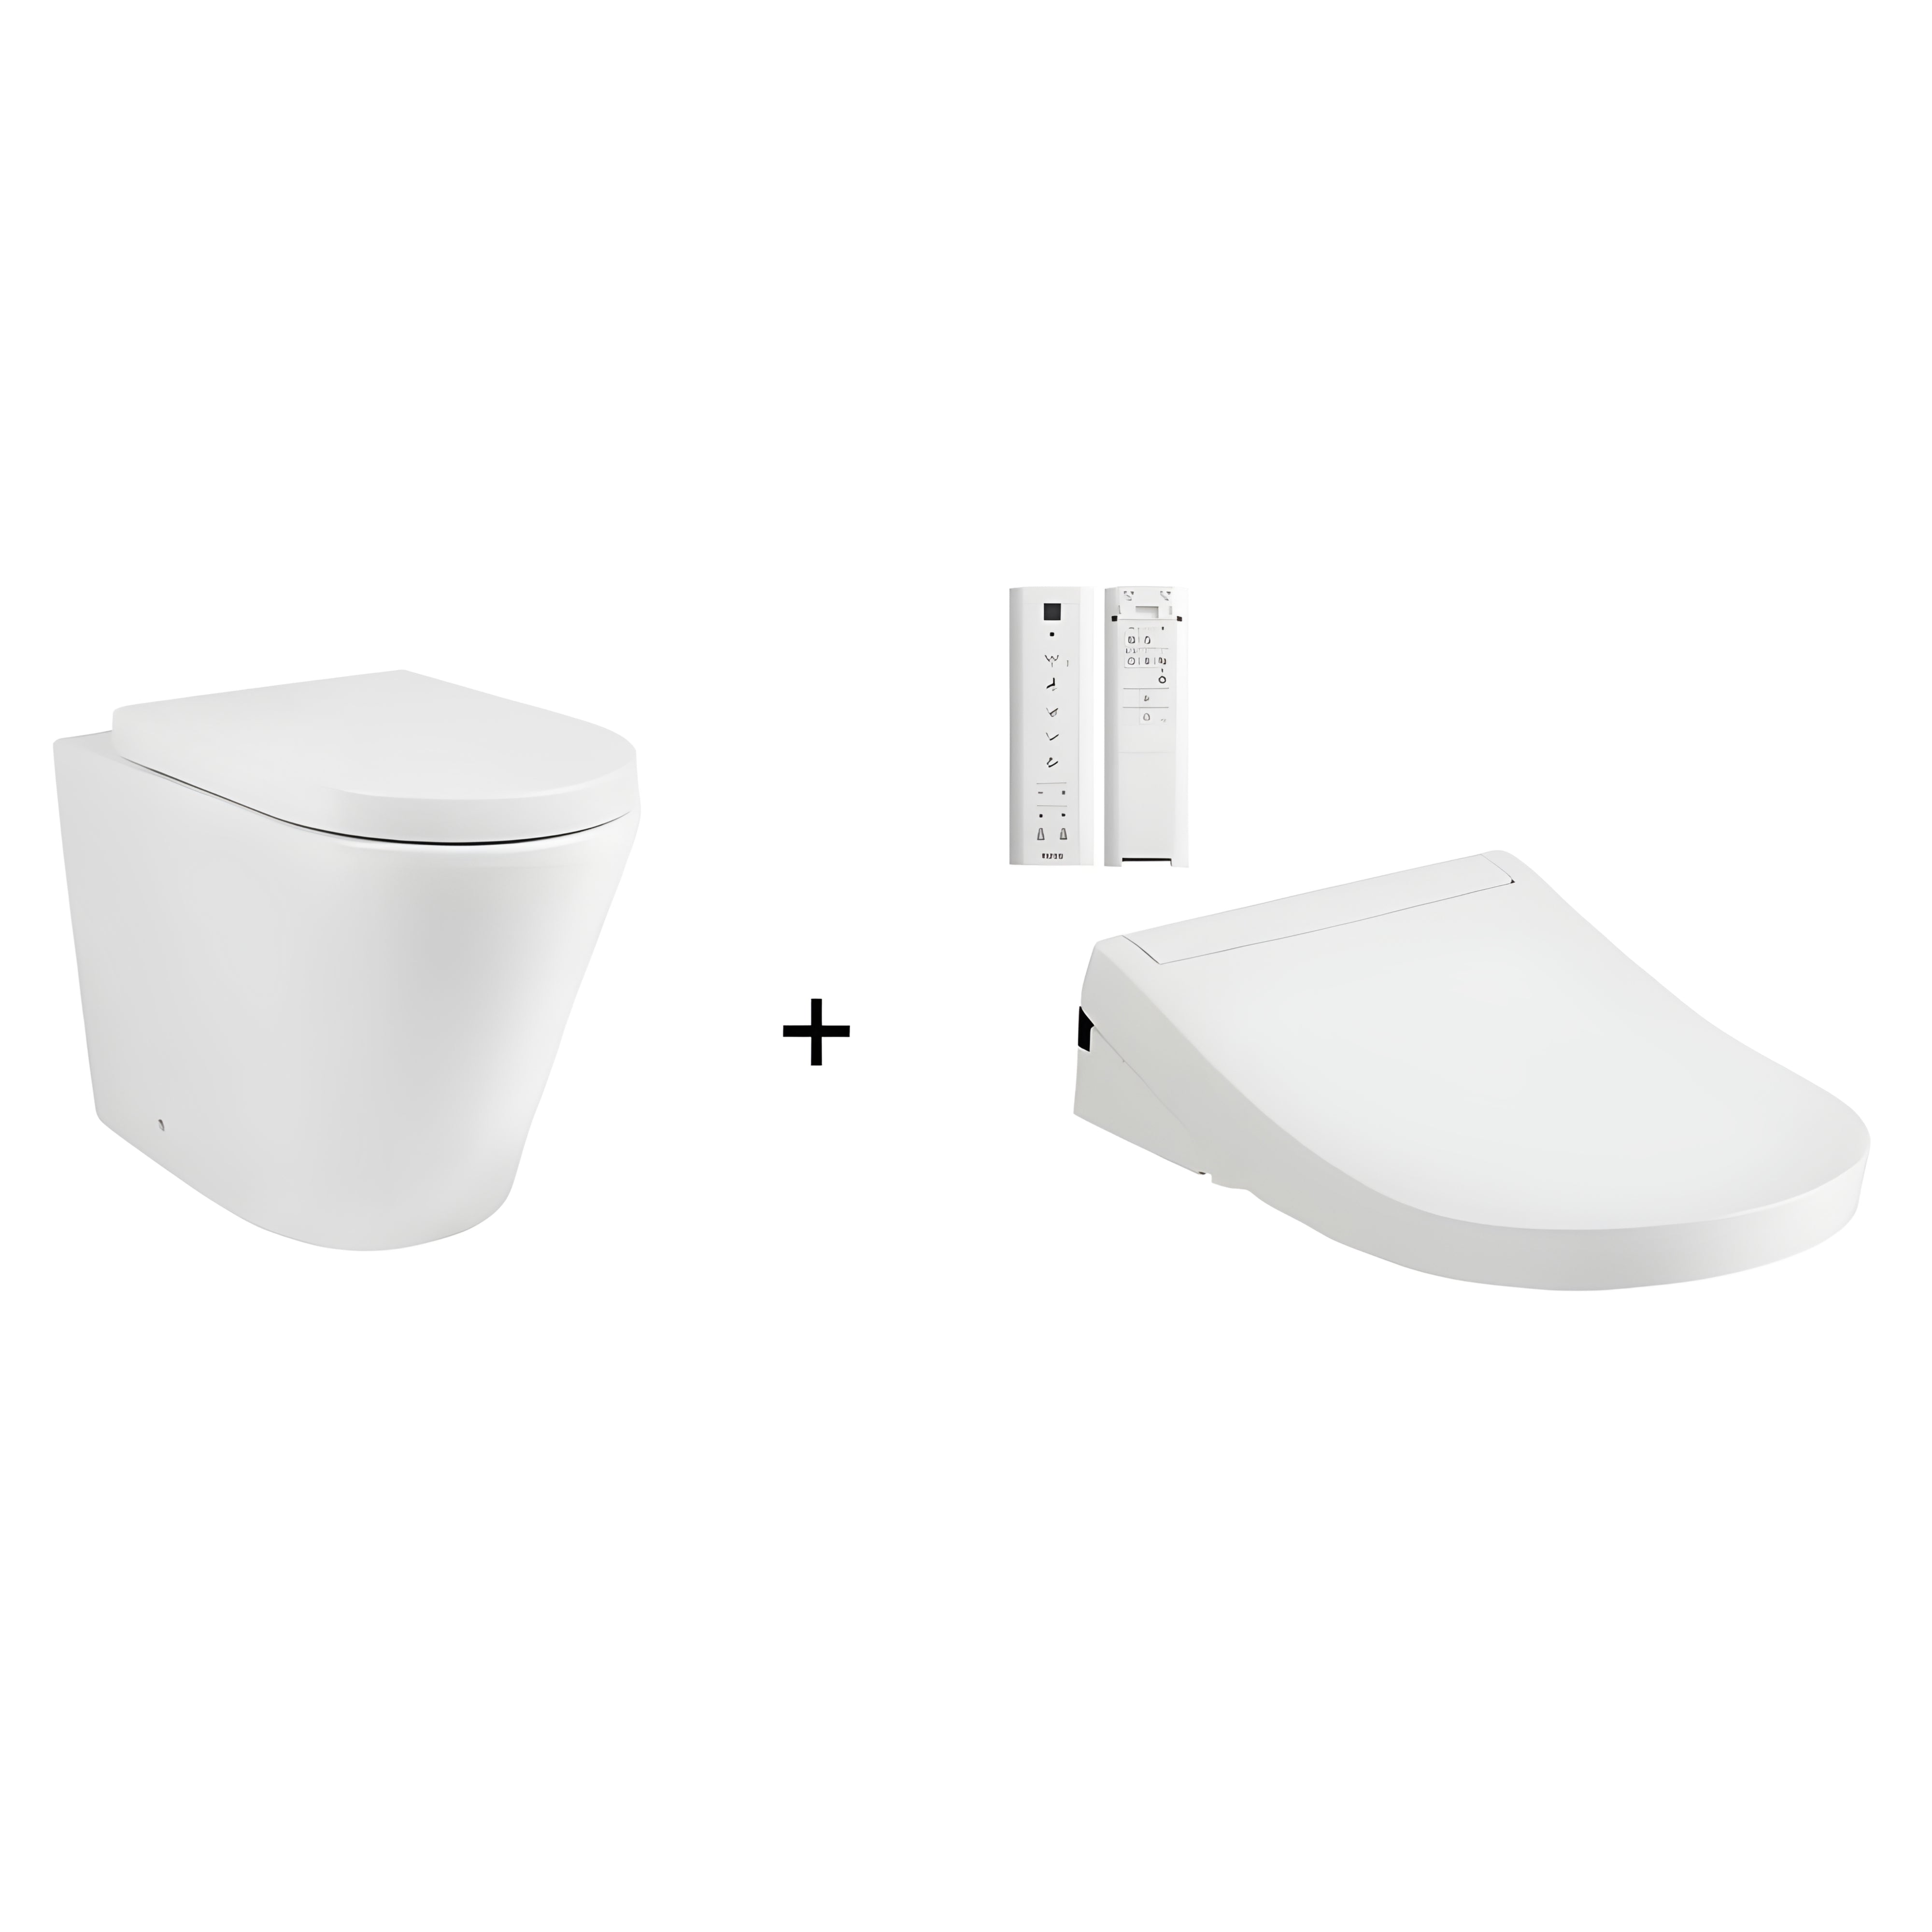 TOTO S5 WASHLET W/ REMOTE CONTROL AND WALL FACED RIMLESS TOILET PACKAGE (D-SHAPED) GLOSS WHITE